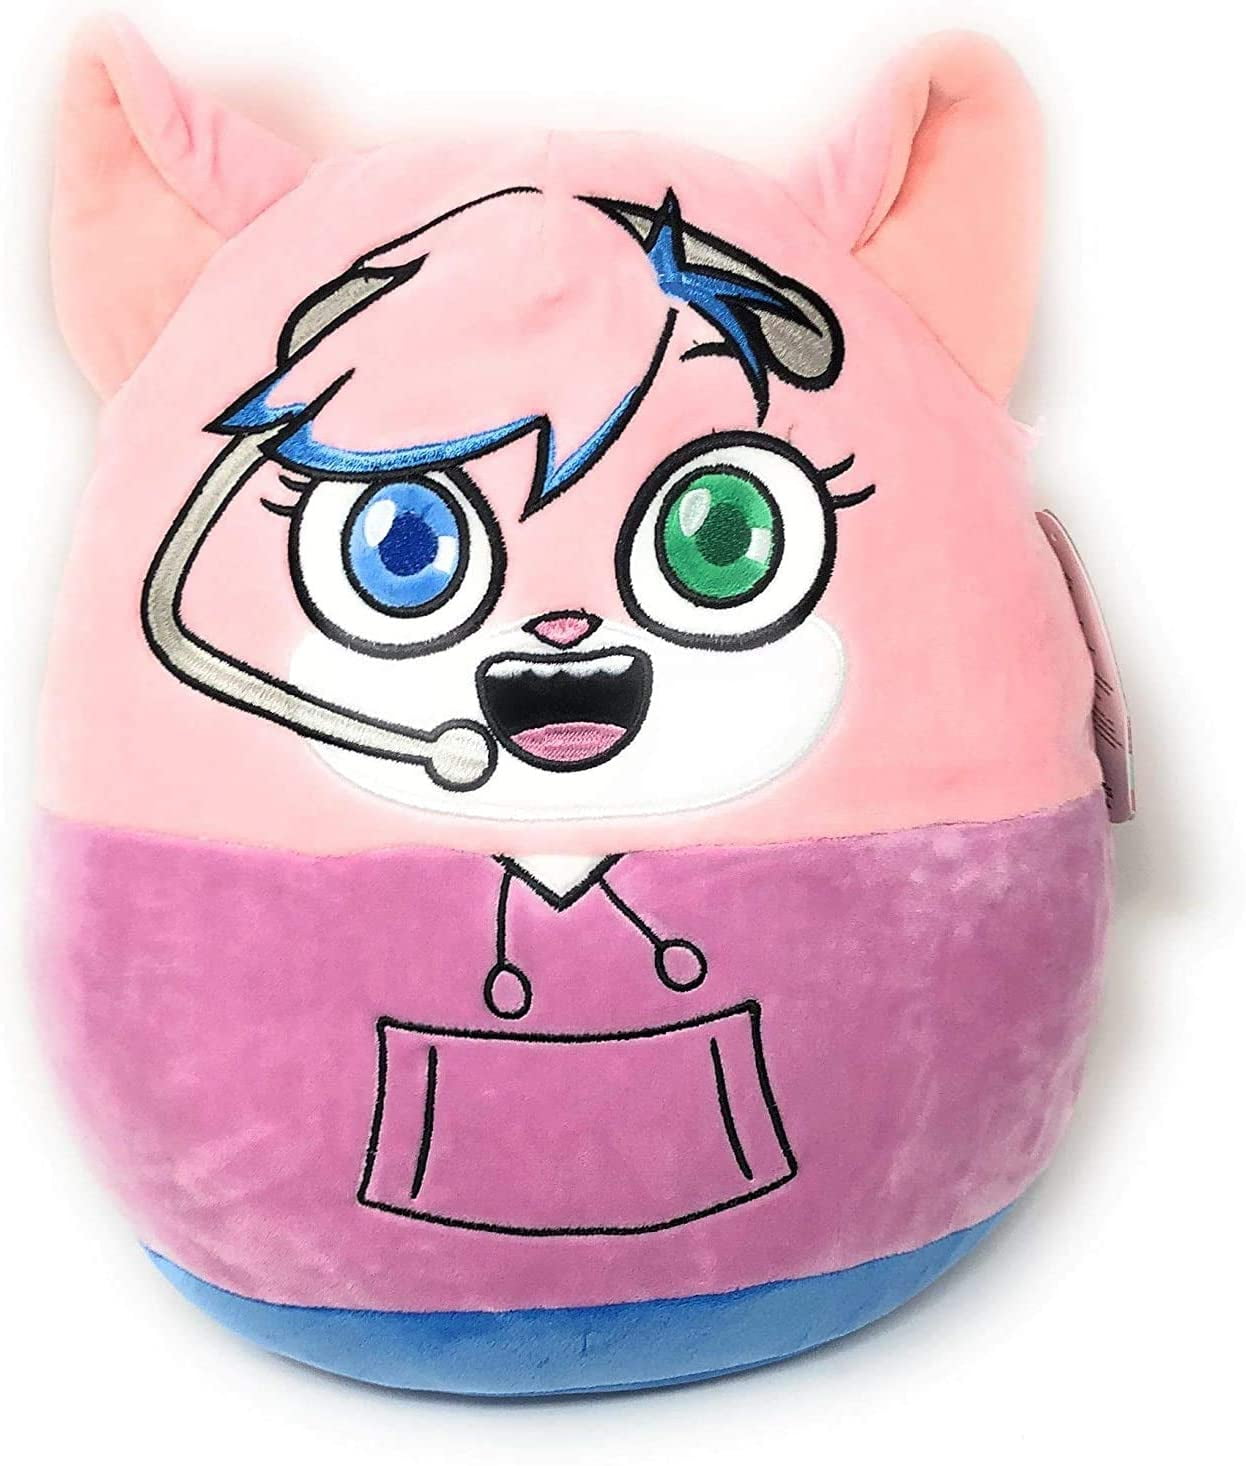 2 Ryan's World Red TITAN 13" Squishmallow Plush Pillow Toys by Kellytoy for sale online 